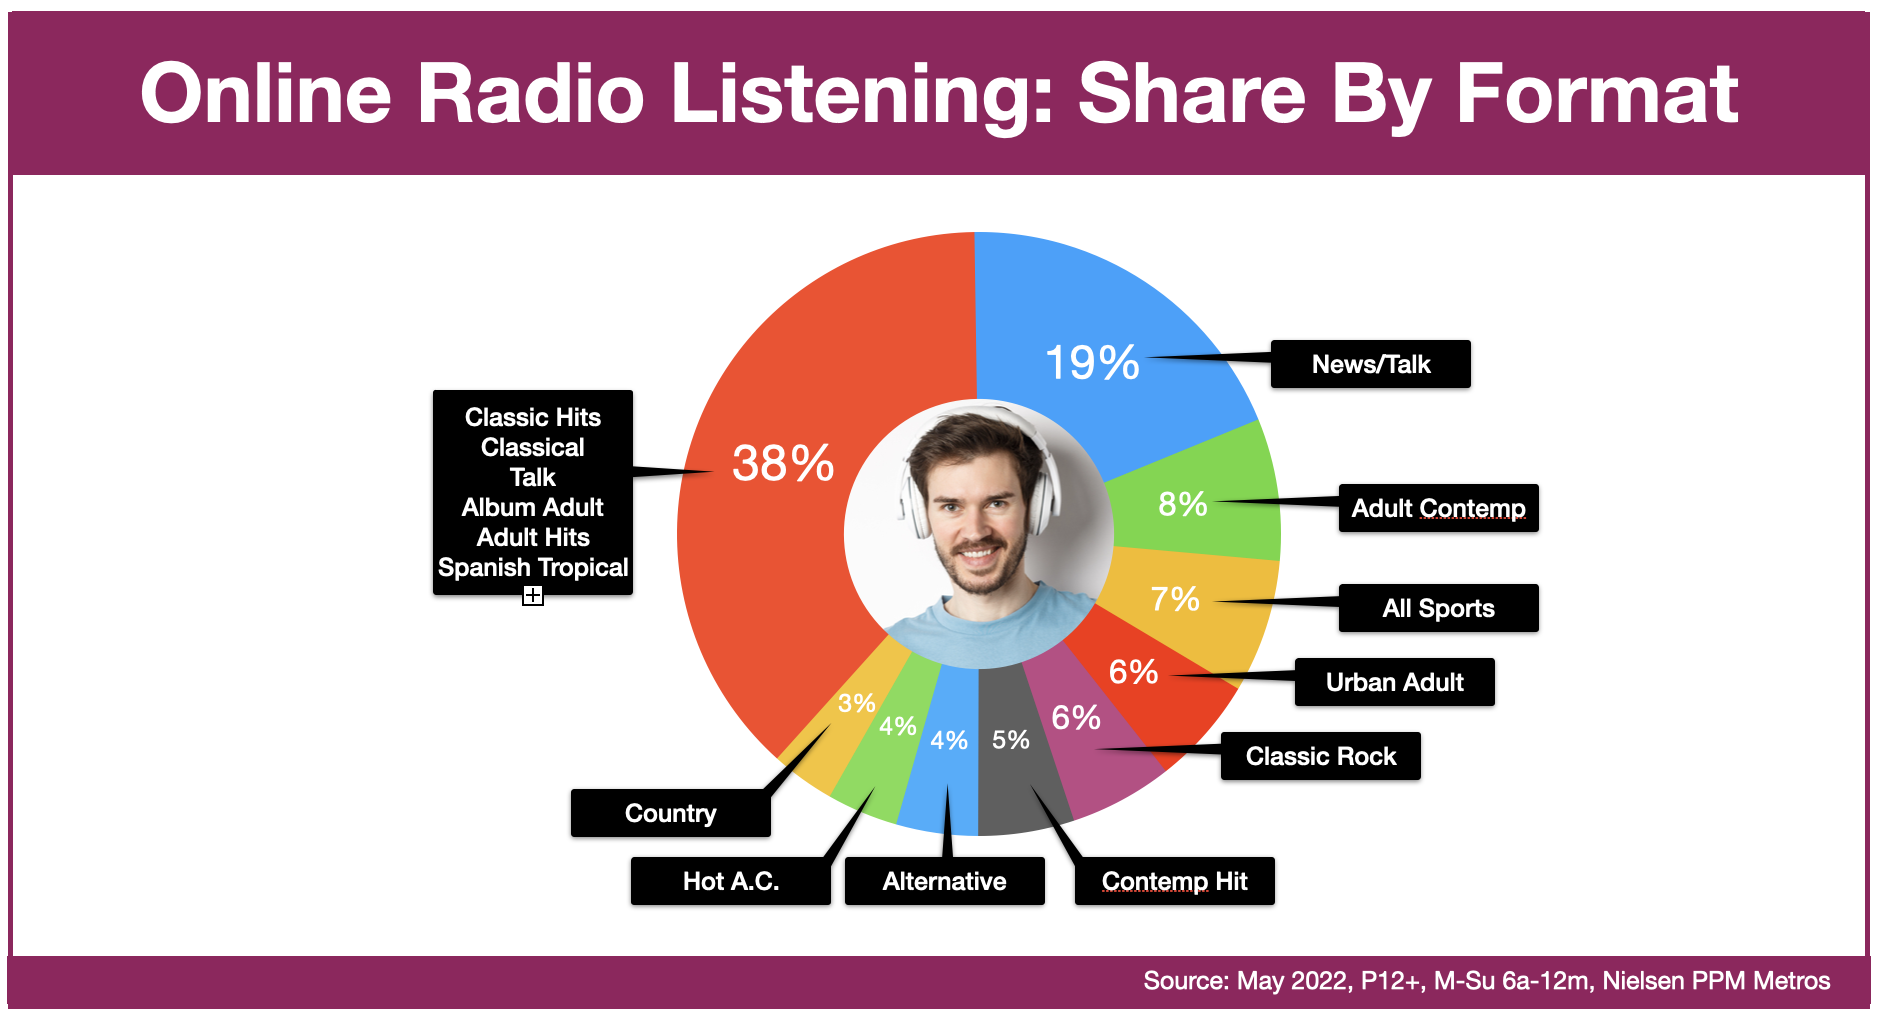 Advertise In Tampa Bay : Online Radio Listening By Format